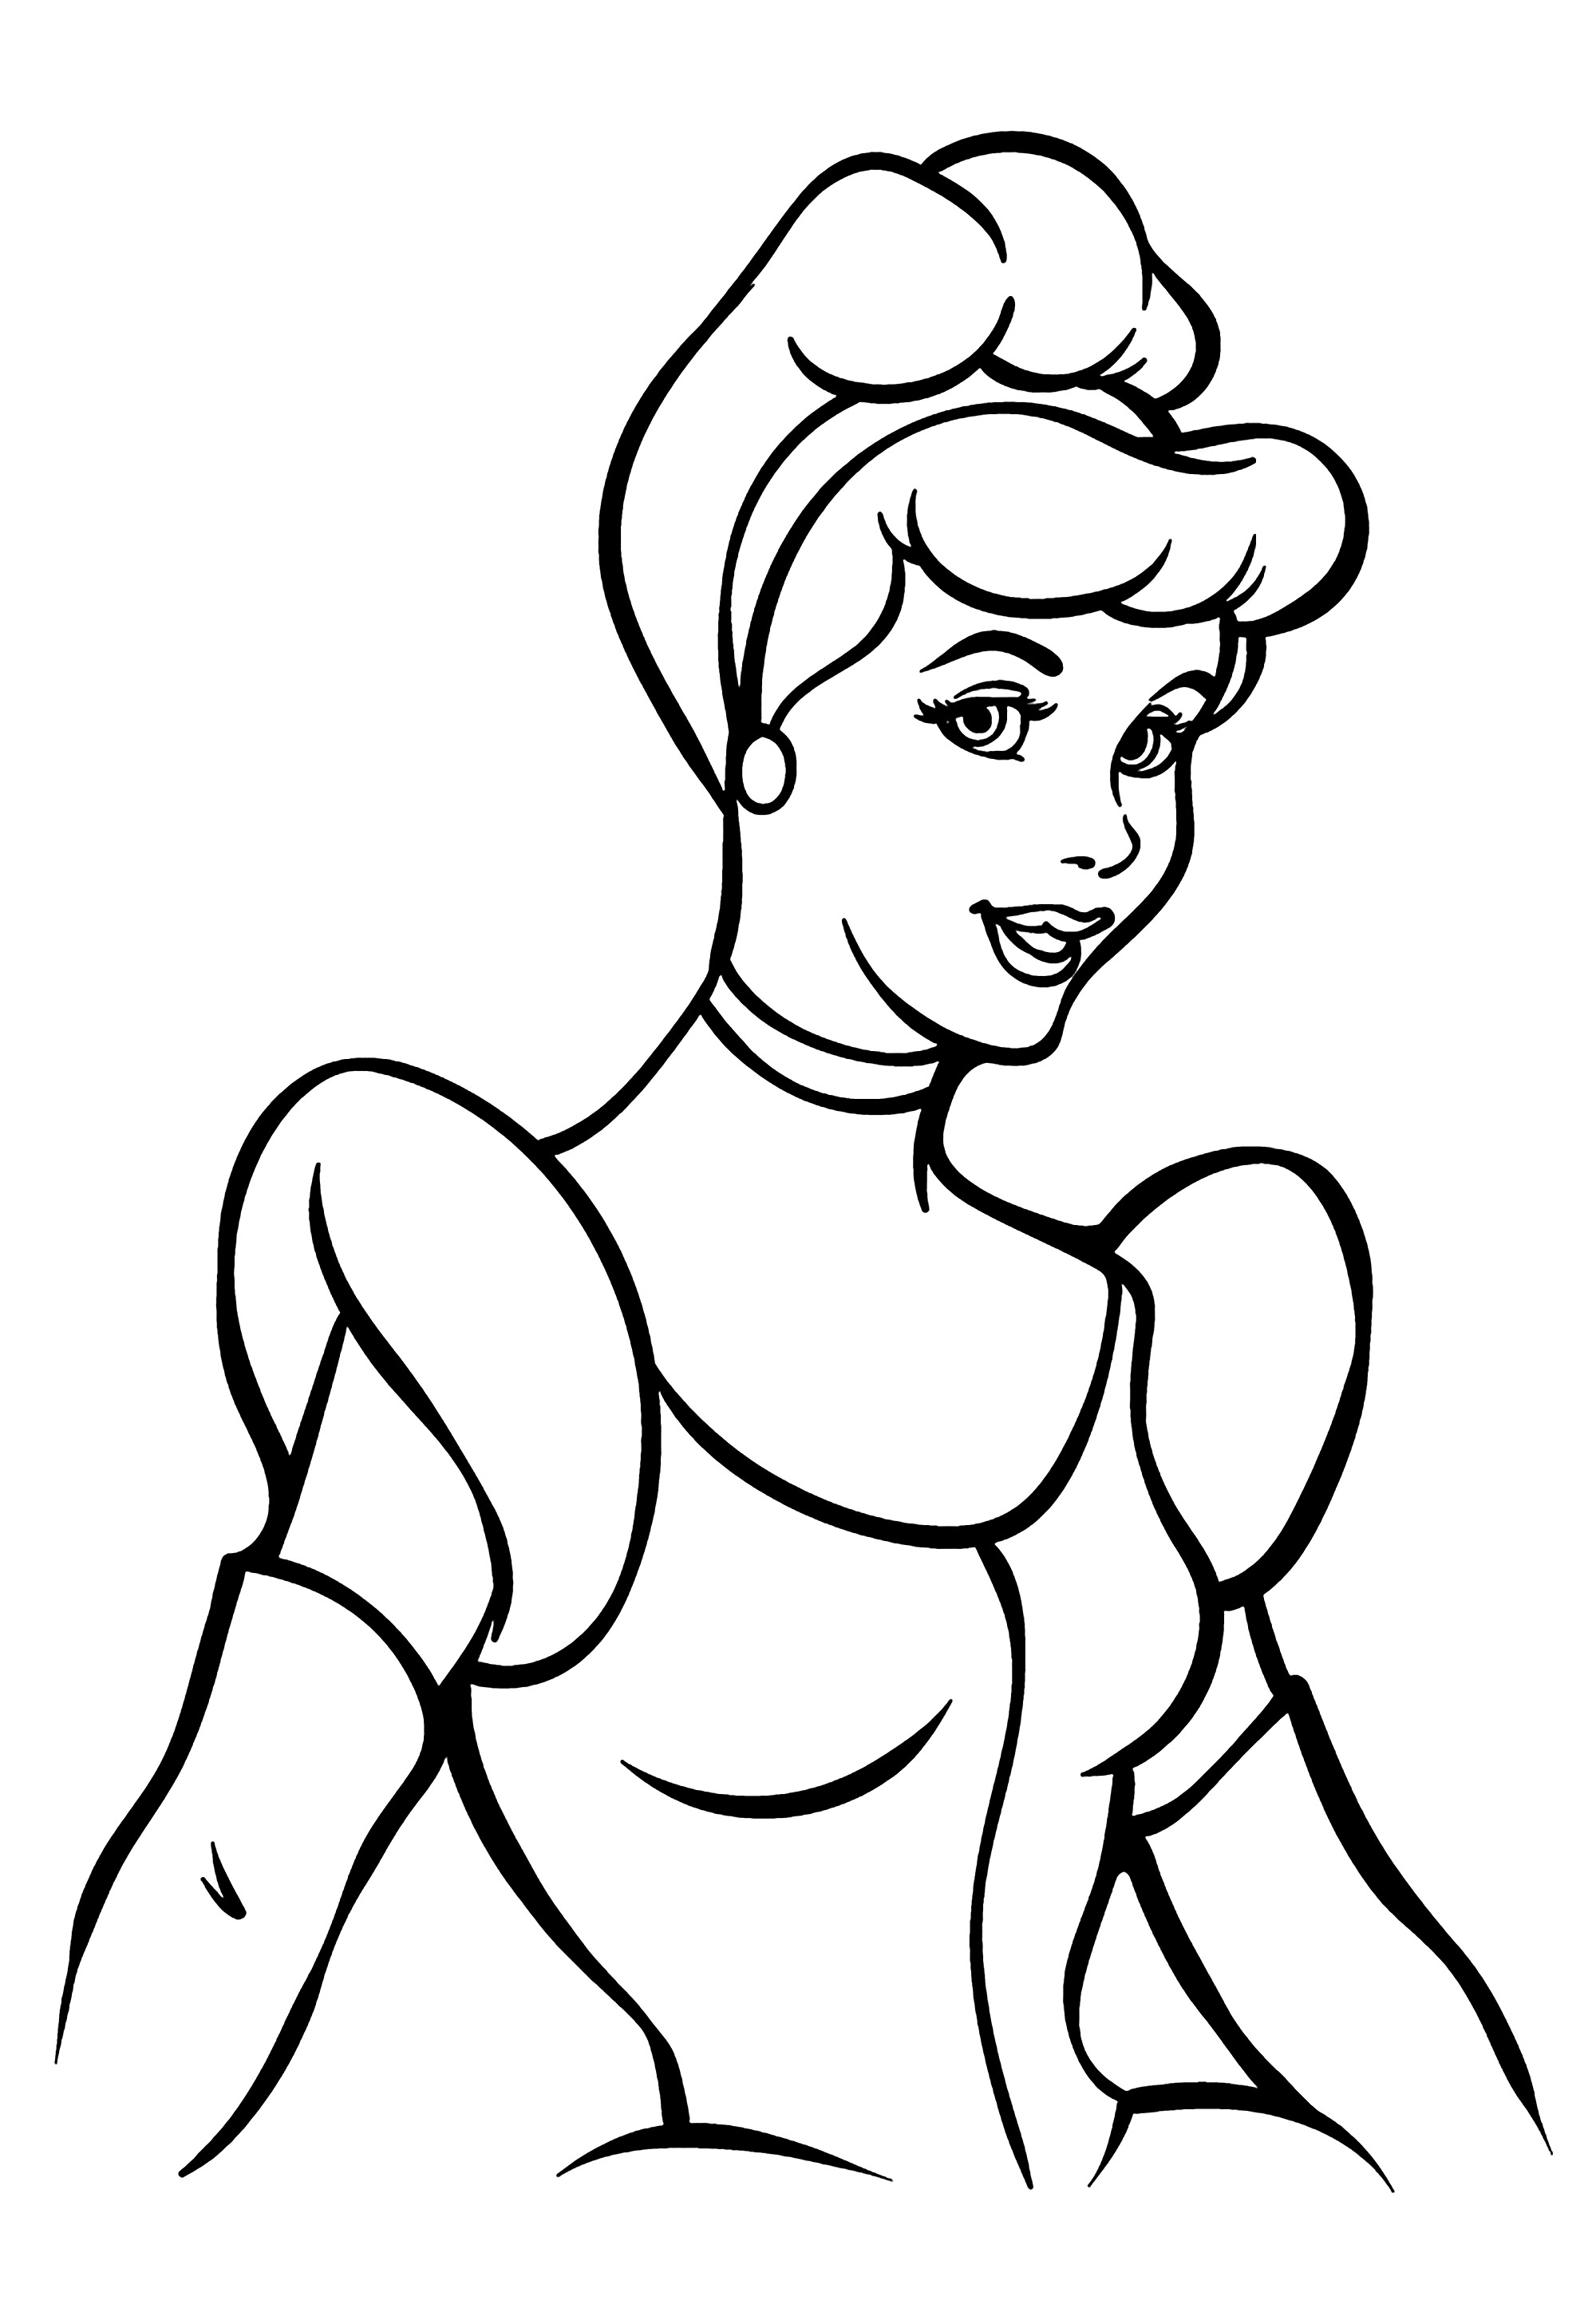 cinderella: Coloring Books For Kids and Adult, Coloring Book with Fun,  Easy, and Relaxing Coloring Pages, Disney coloring books fo (Paperback)